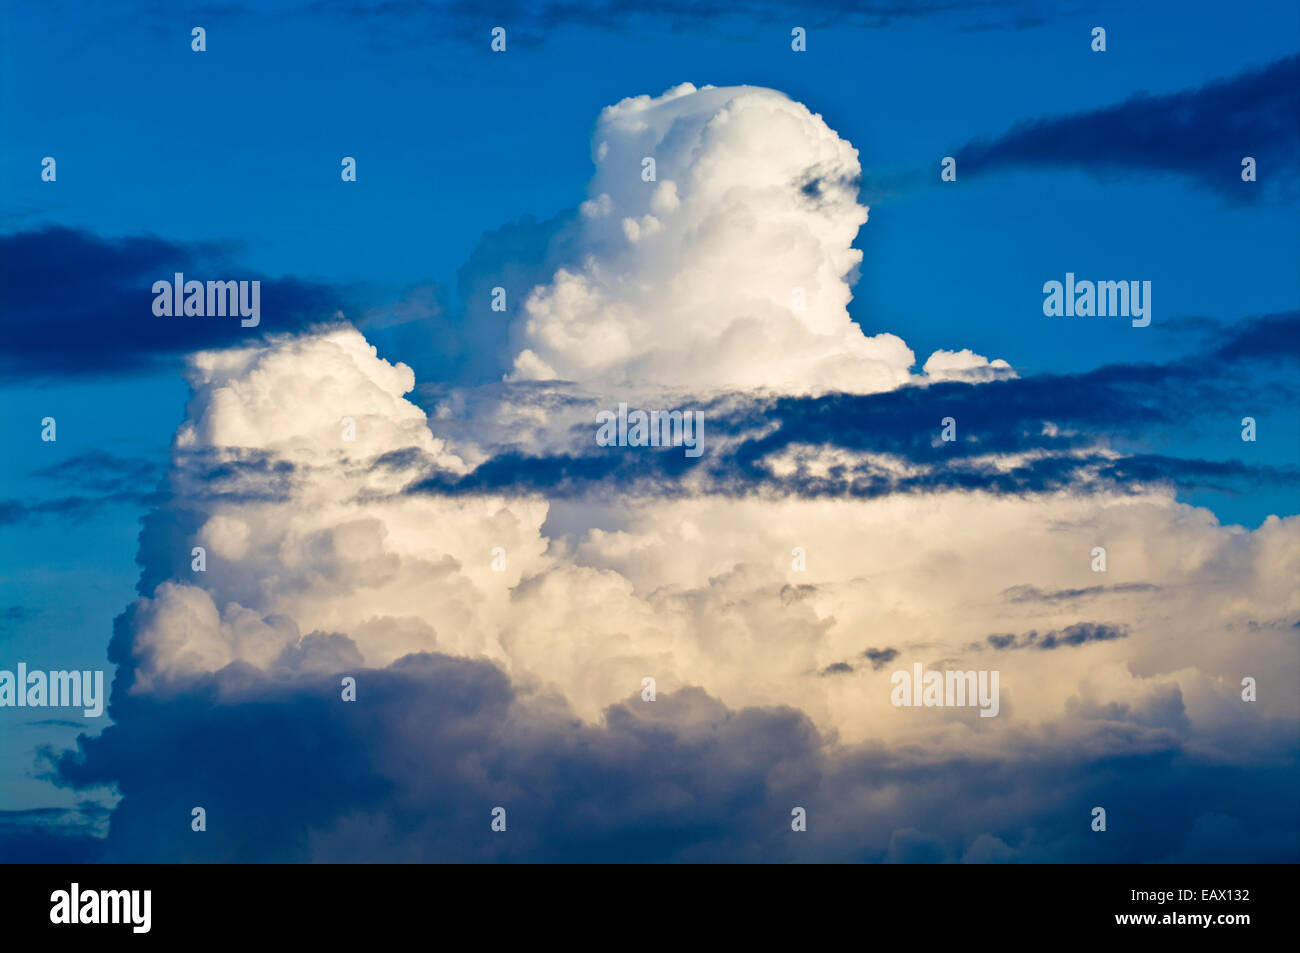 White thunderhead clouds billow into the sky as a storm brews above the Amazon rainforest. Stock Photo